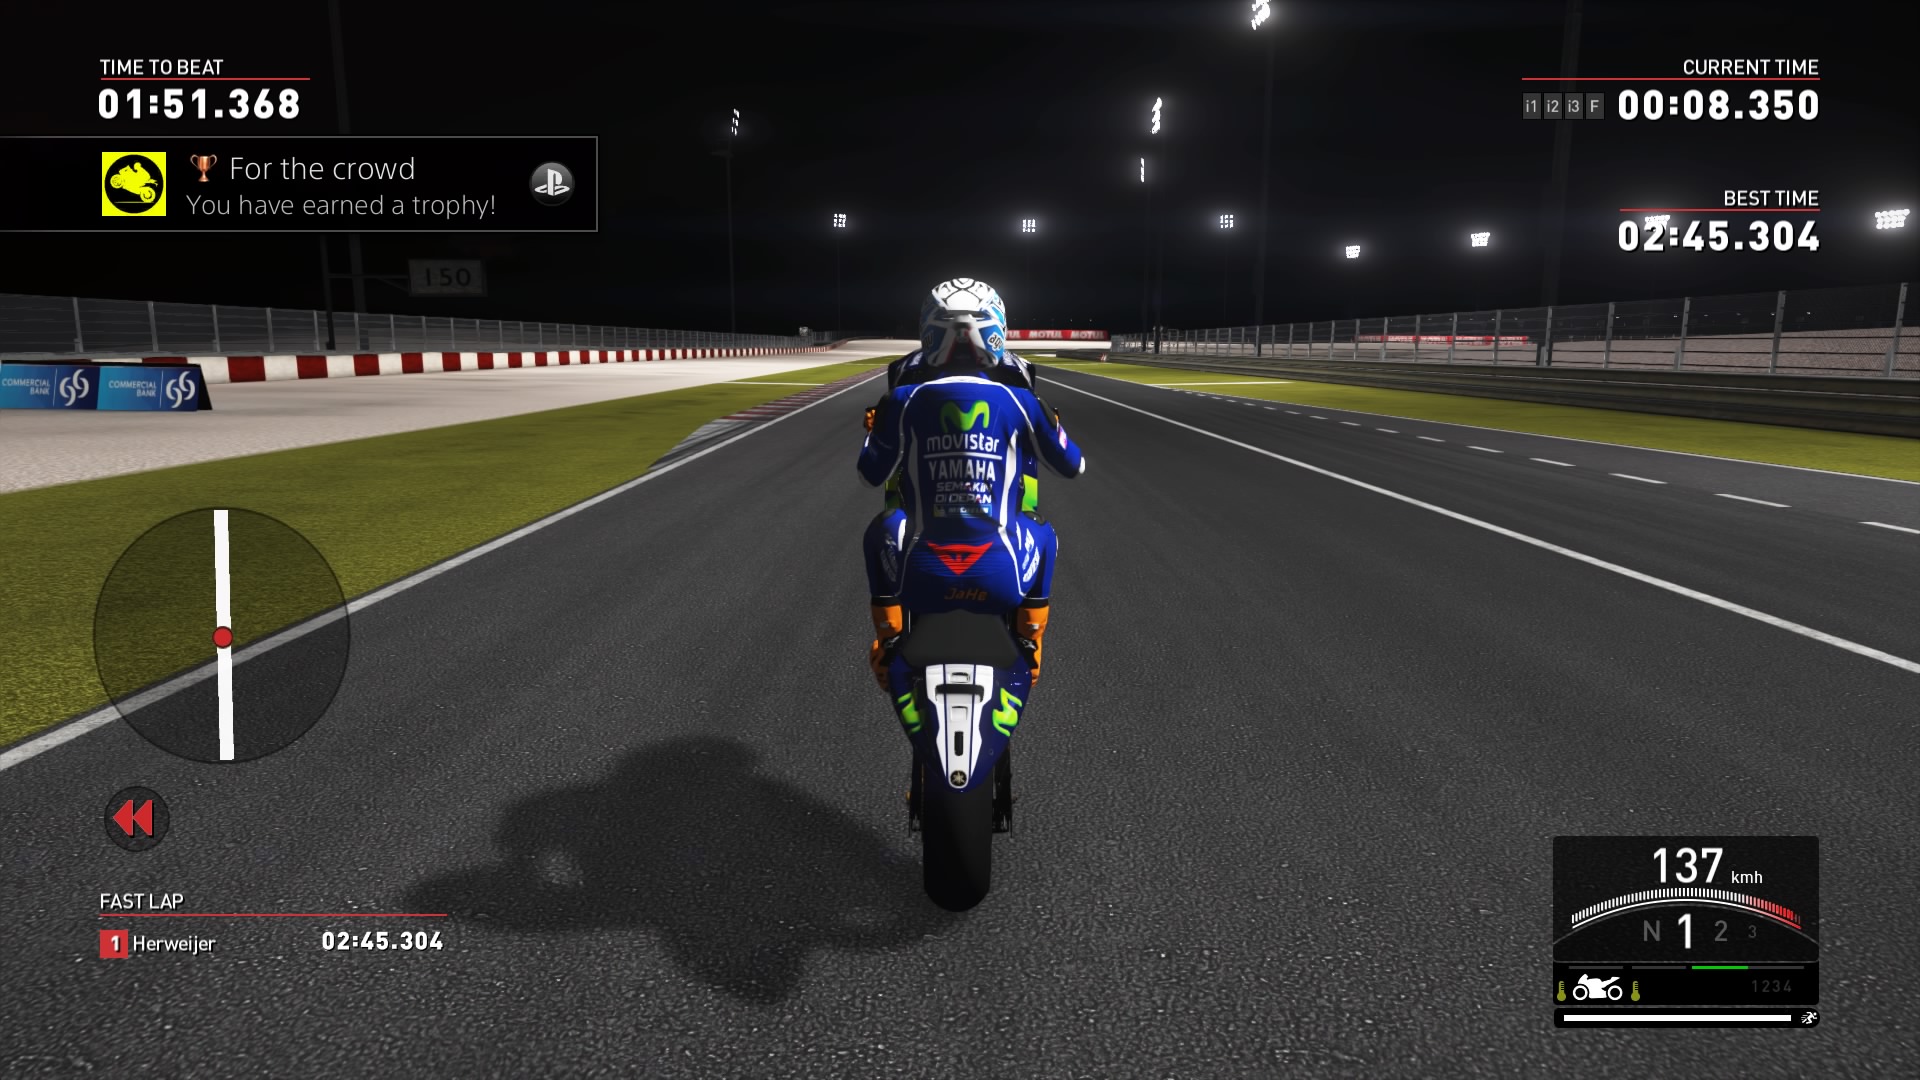 Valentino Rossi The Game
For the crowd(Bronze)